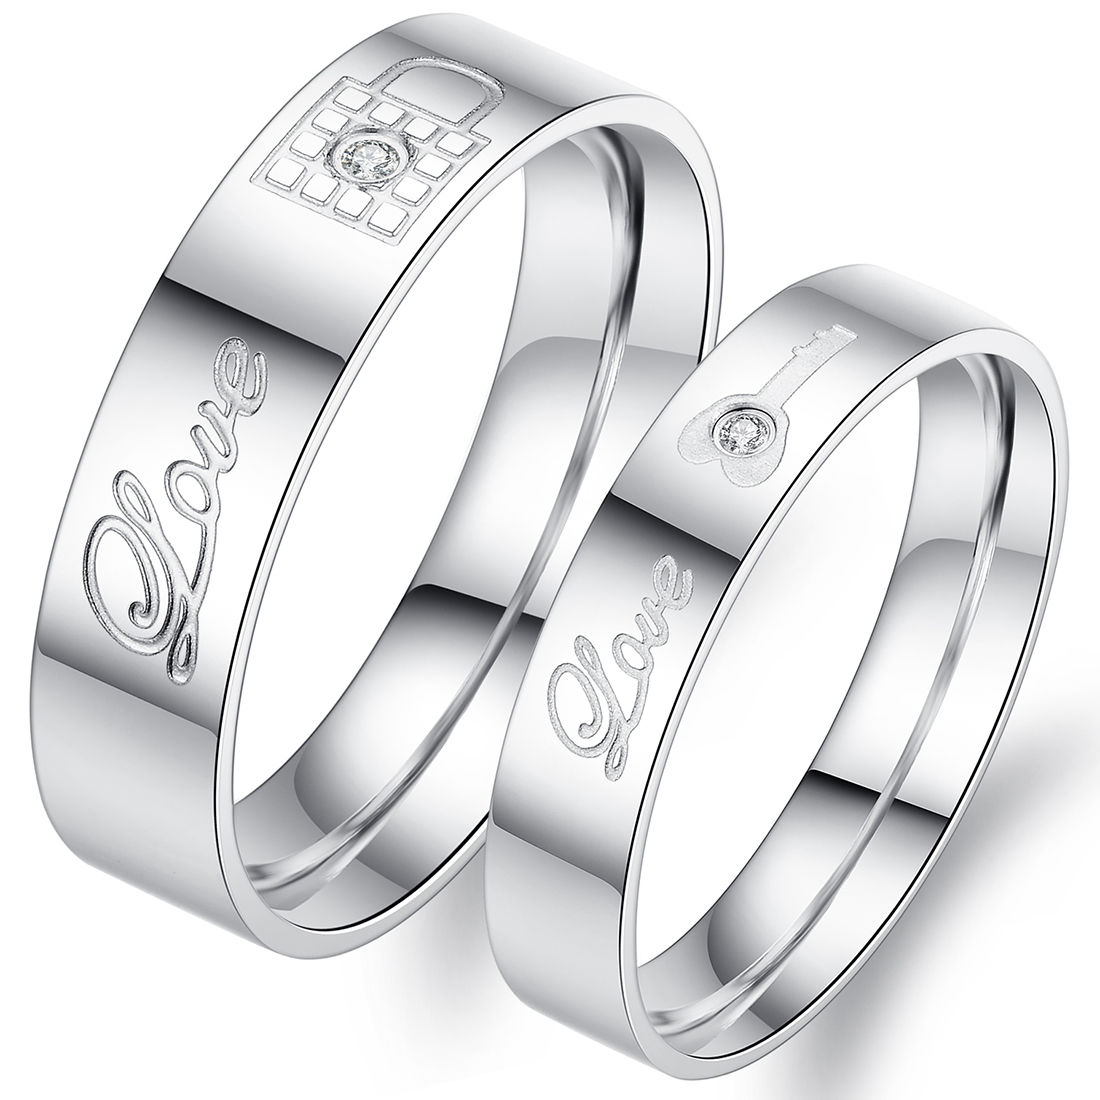 Rings For Couples Best Rings For Relationship Best Rings For valentine's day